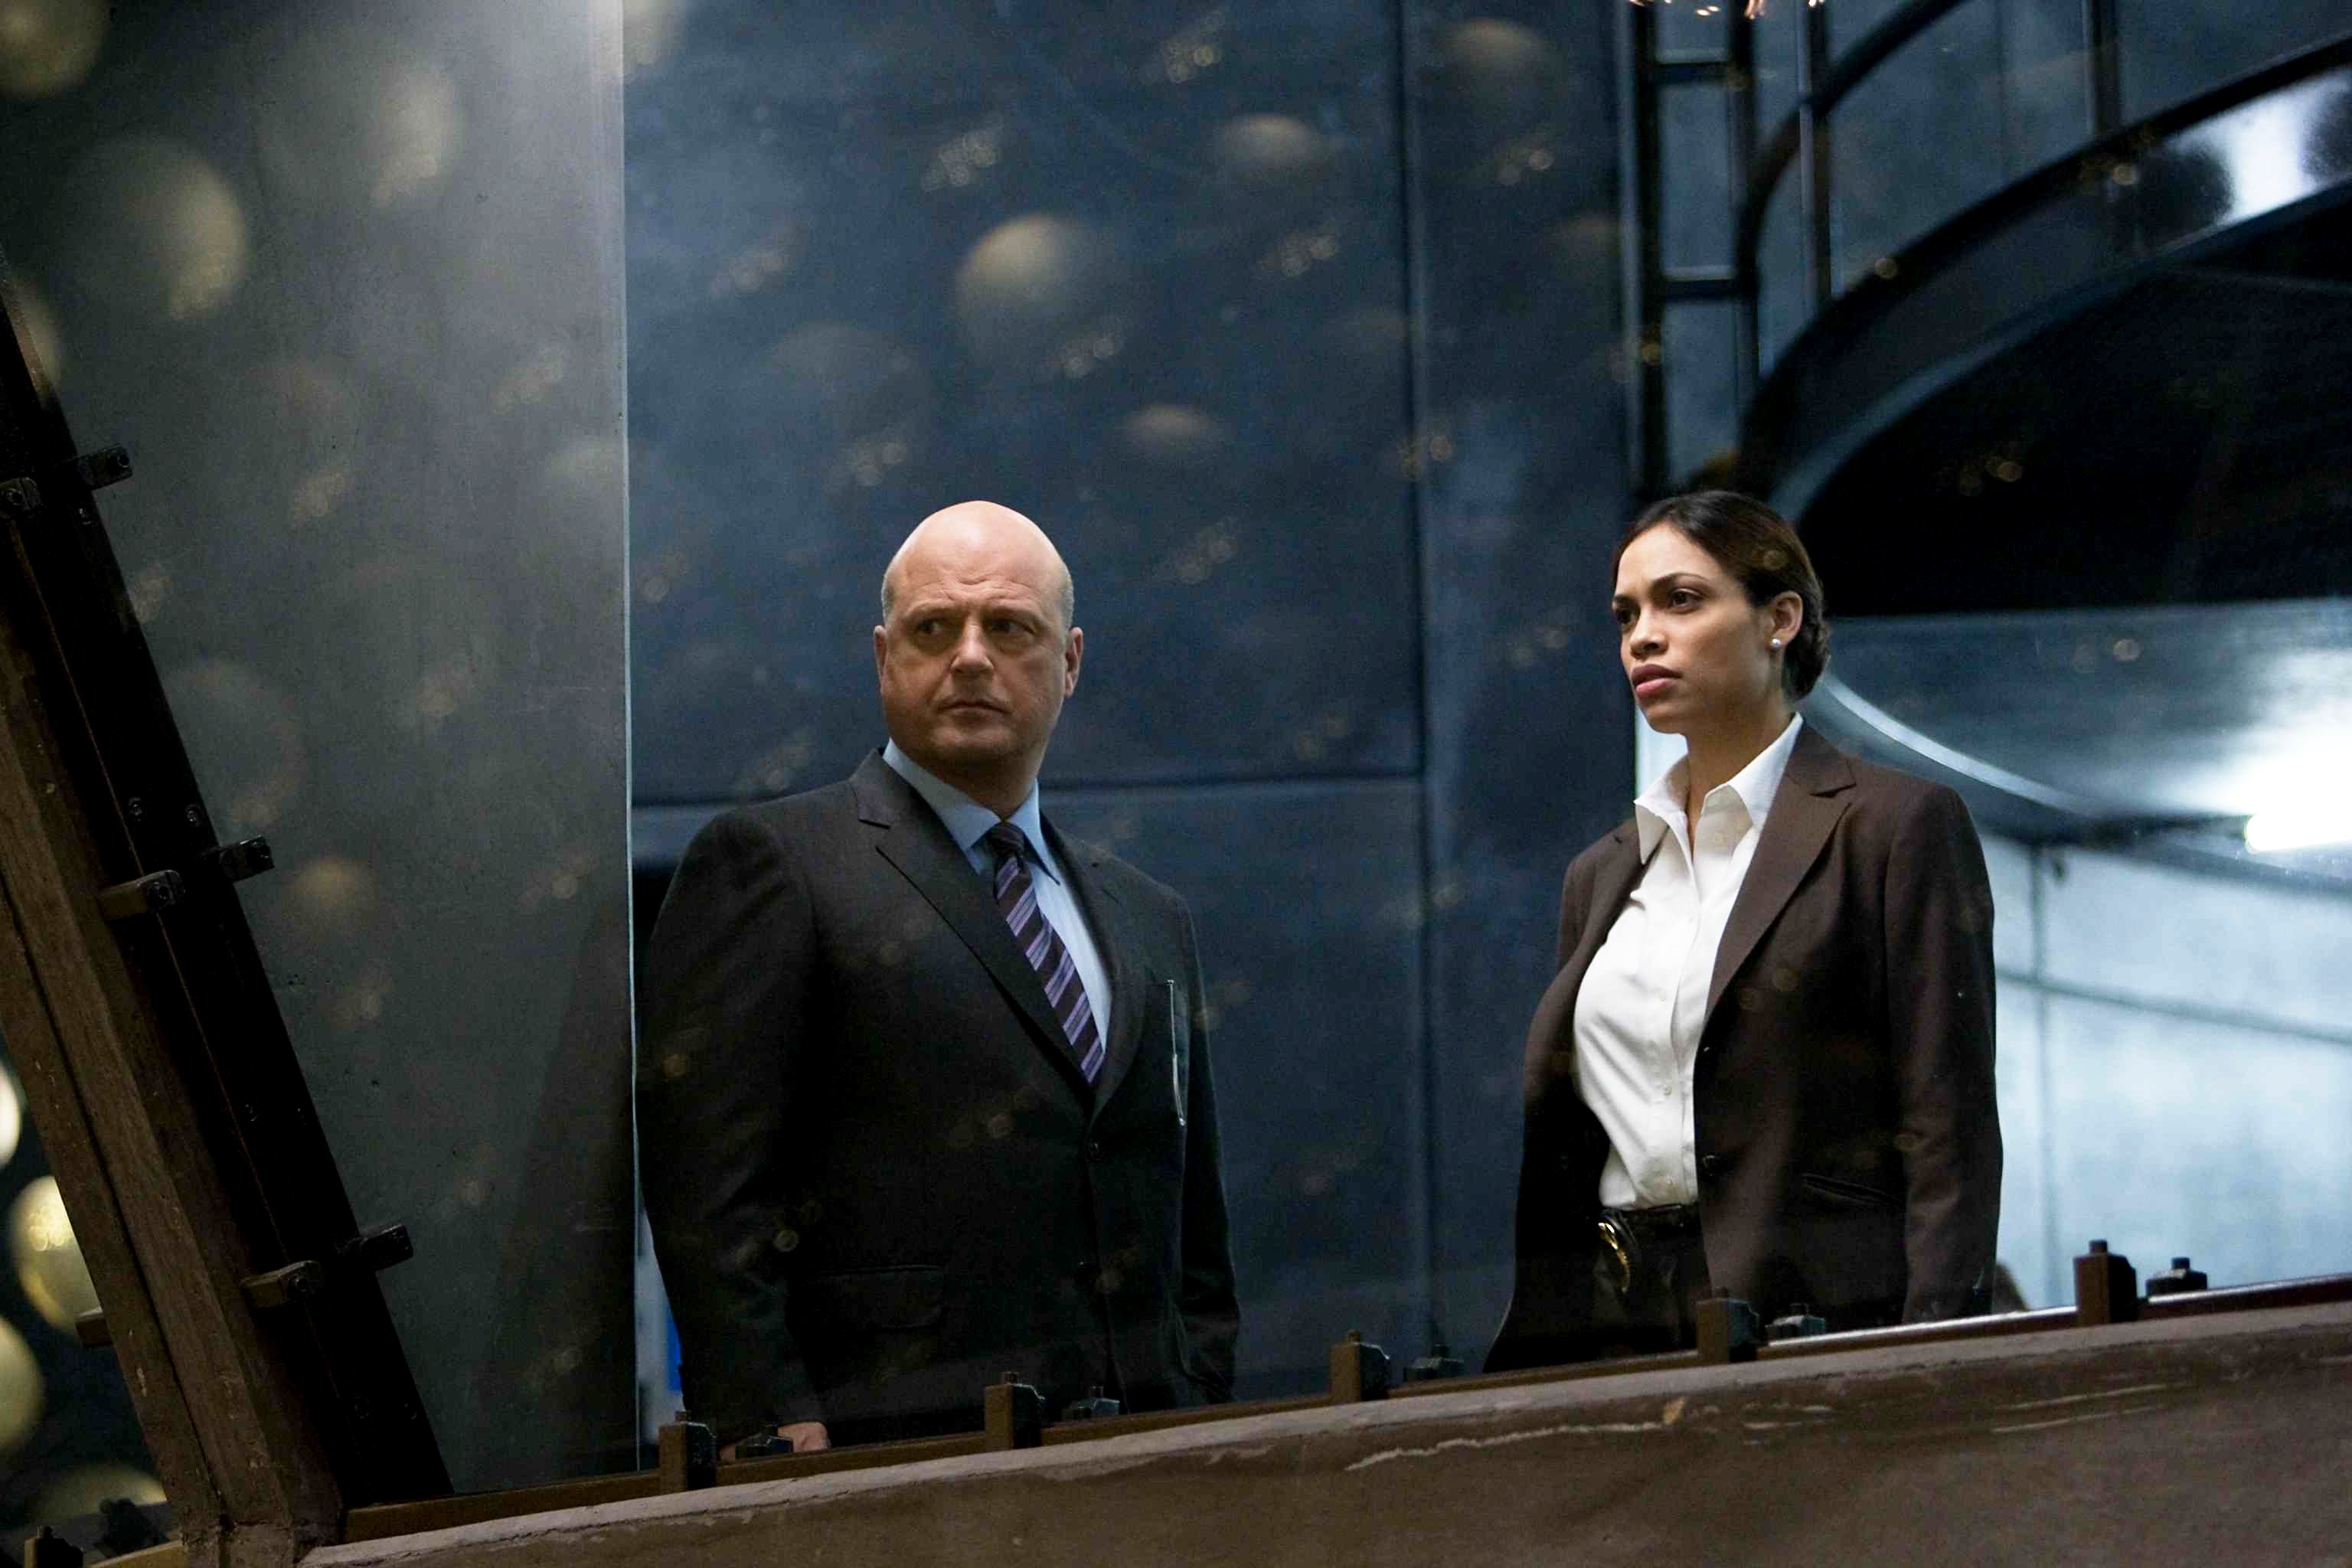 Michael Chiklis and Rosario Dawson (Zoe Perez) in DreamWorks SKG's Eagle Eye (2008). Photo credit by Ralph Nelson.